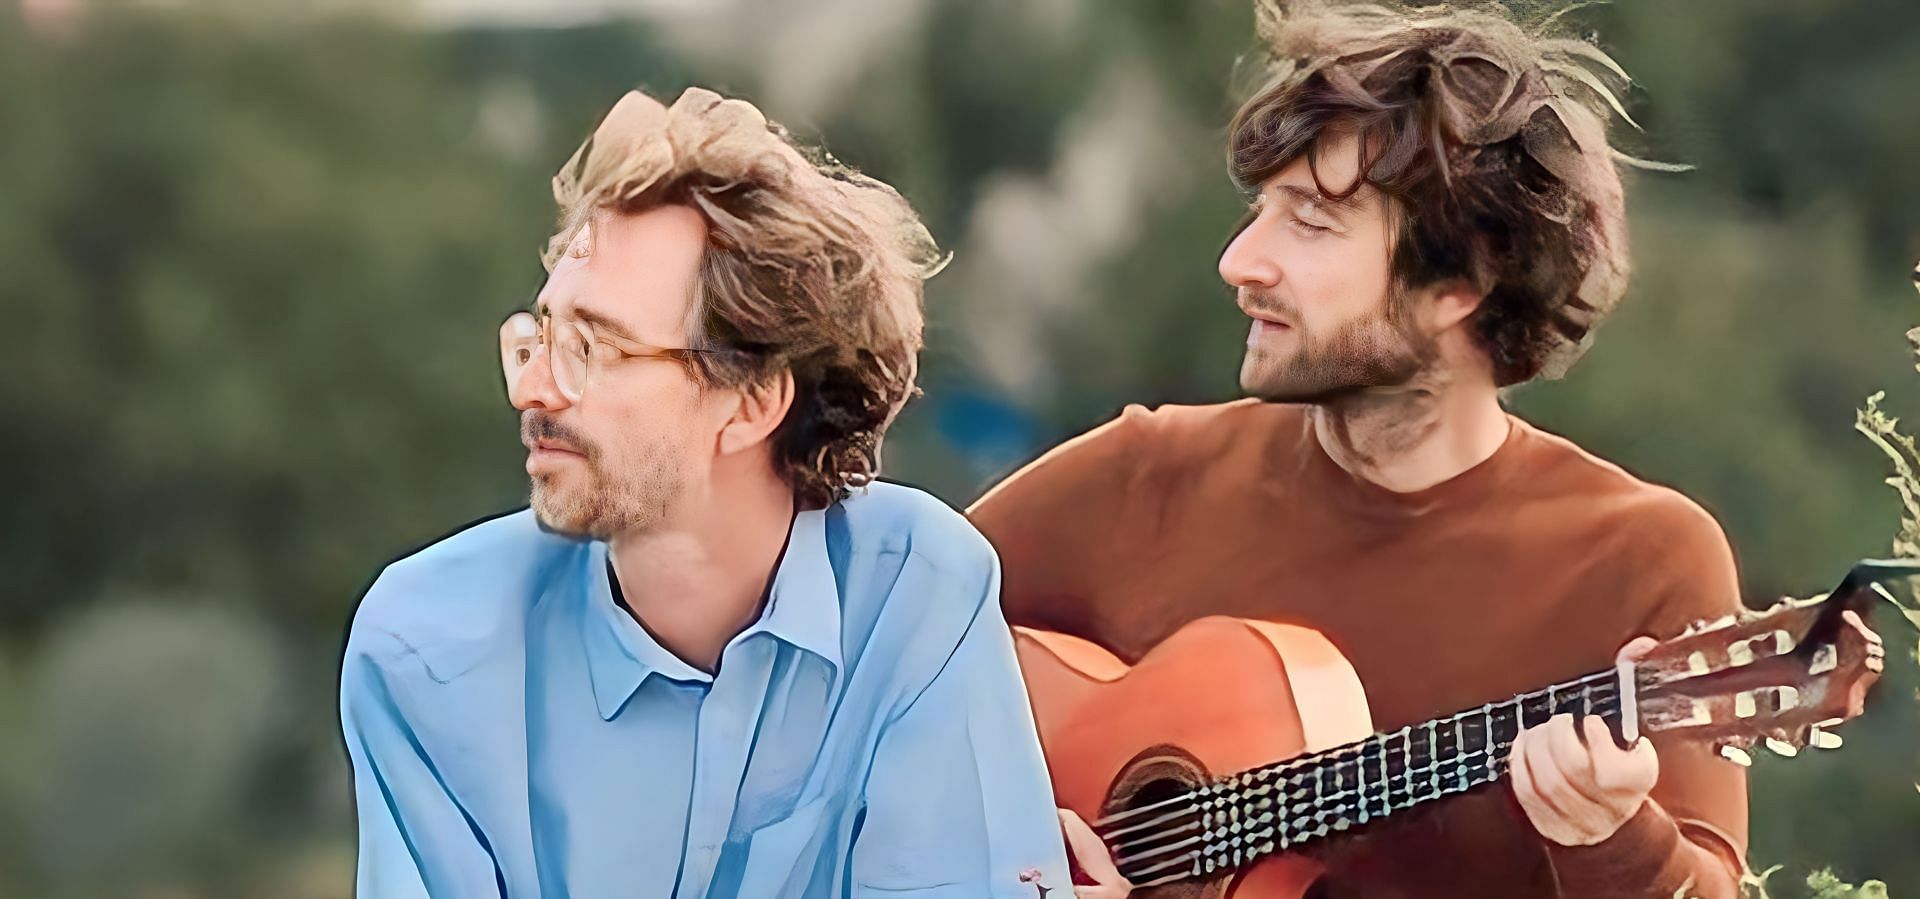 King of Convenience Tour 2023 Tickets, dates, venues and more